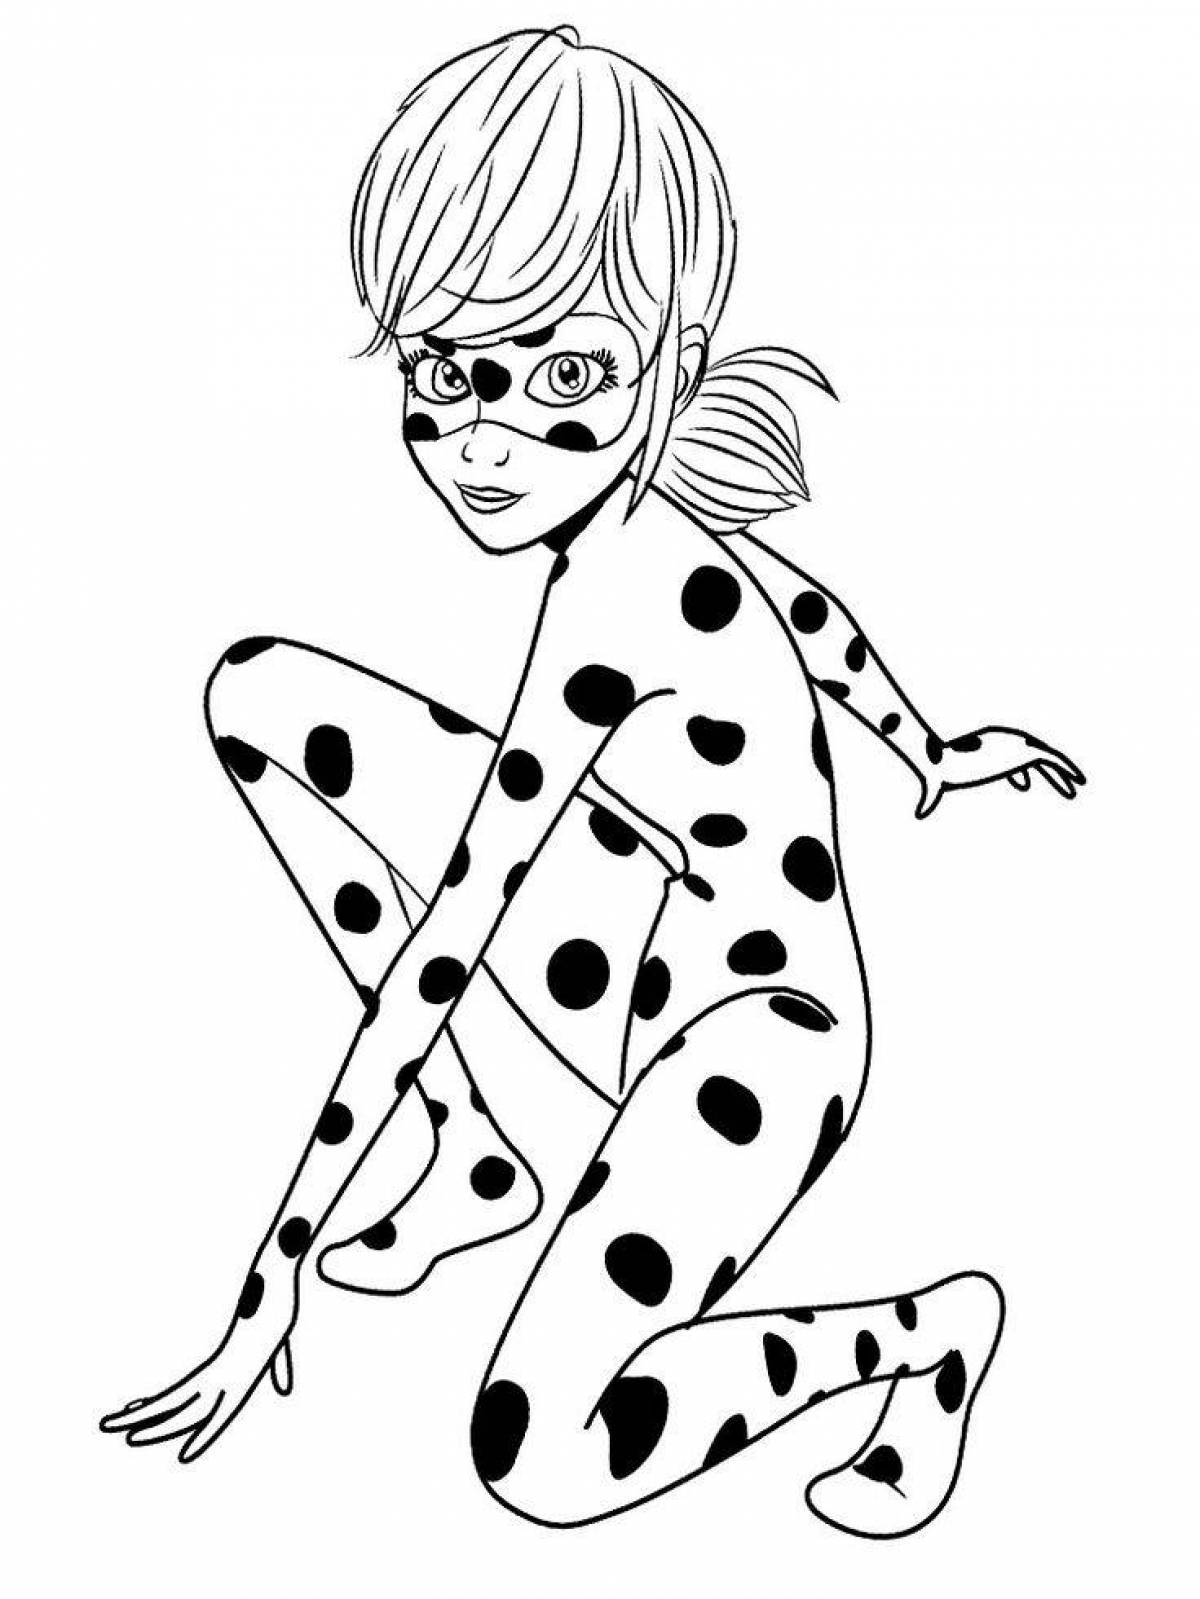 Colourful ladybug and super cat coloring pages for kids